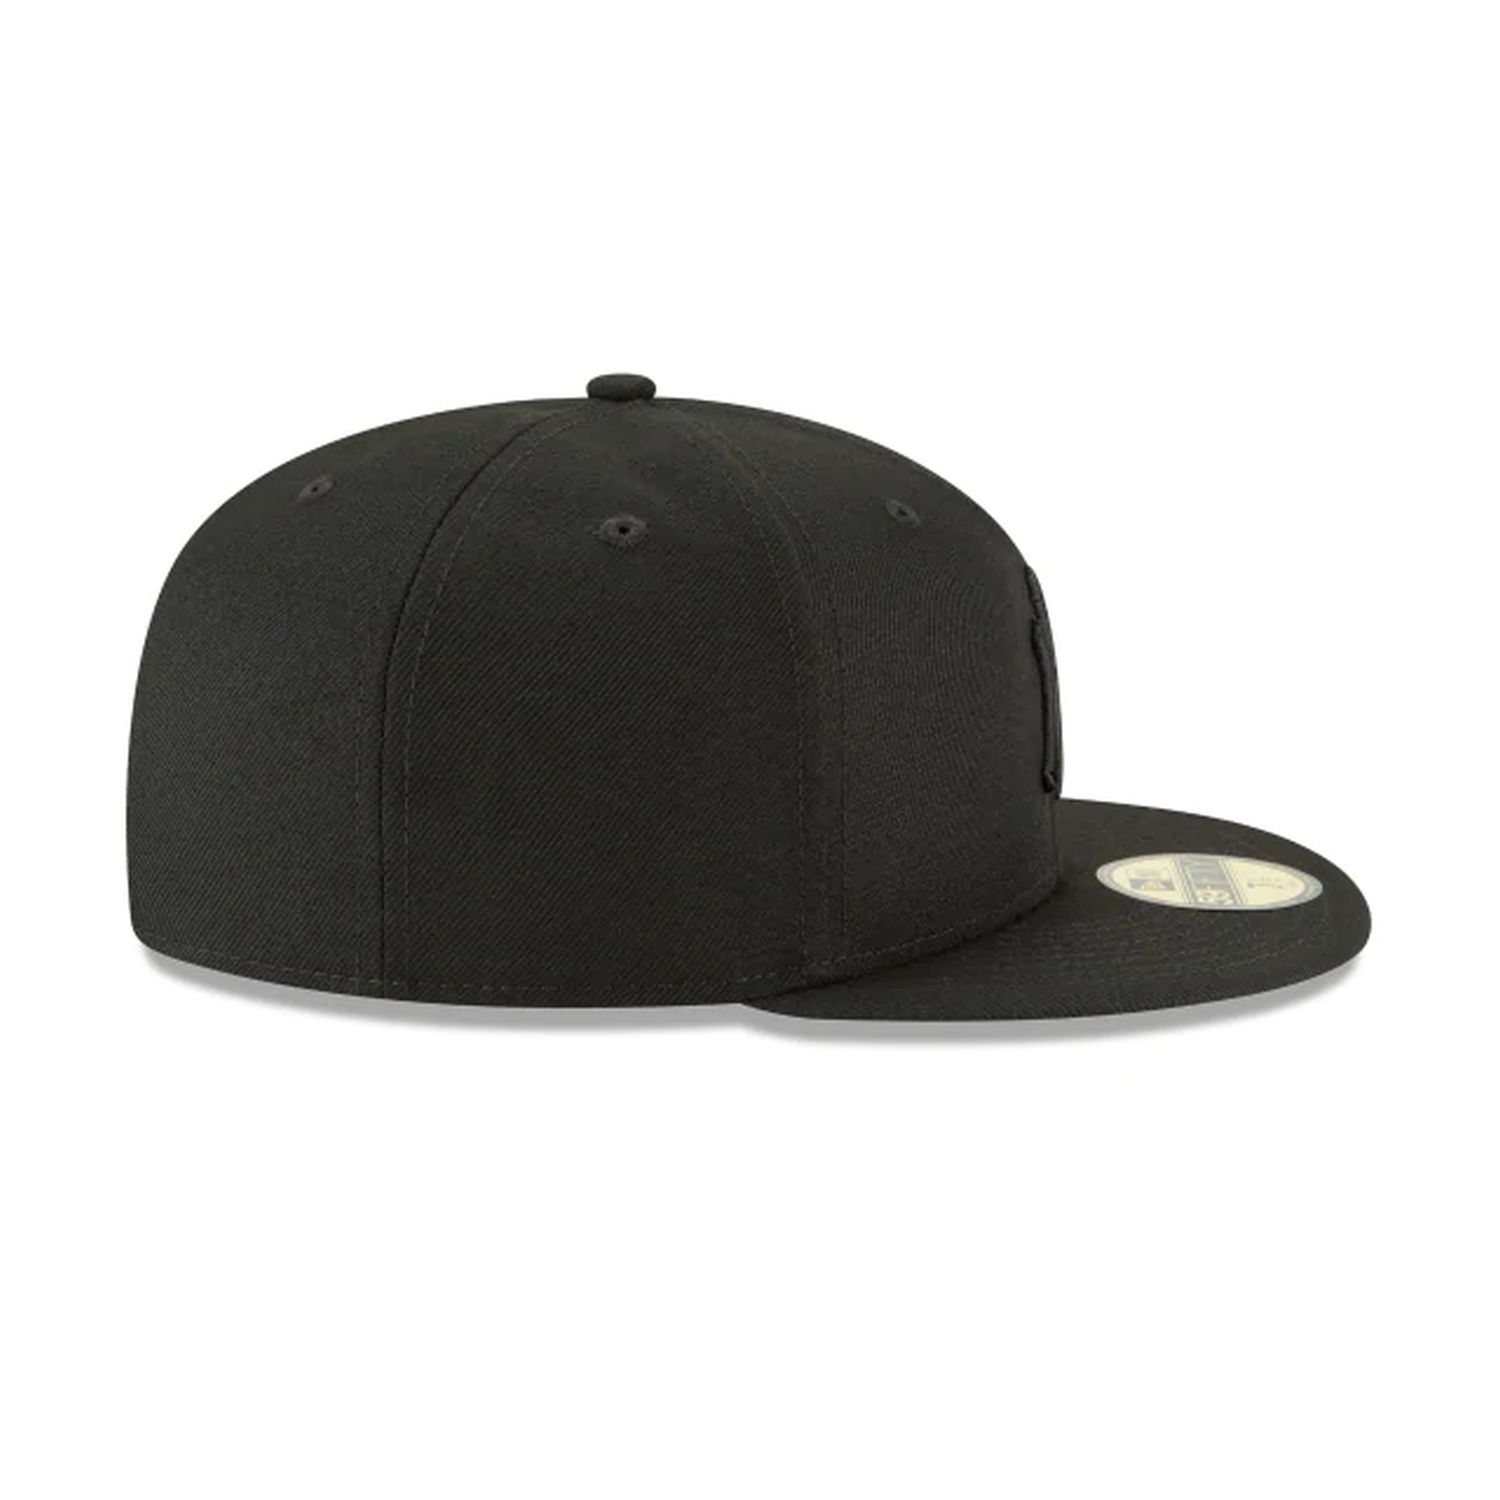 New Era New York Yankees Blackout Basic 59Fifty Fitted Cap Hat Black ...